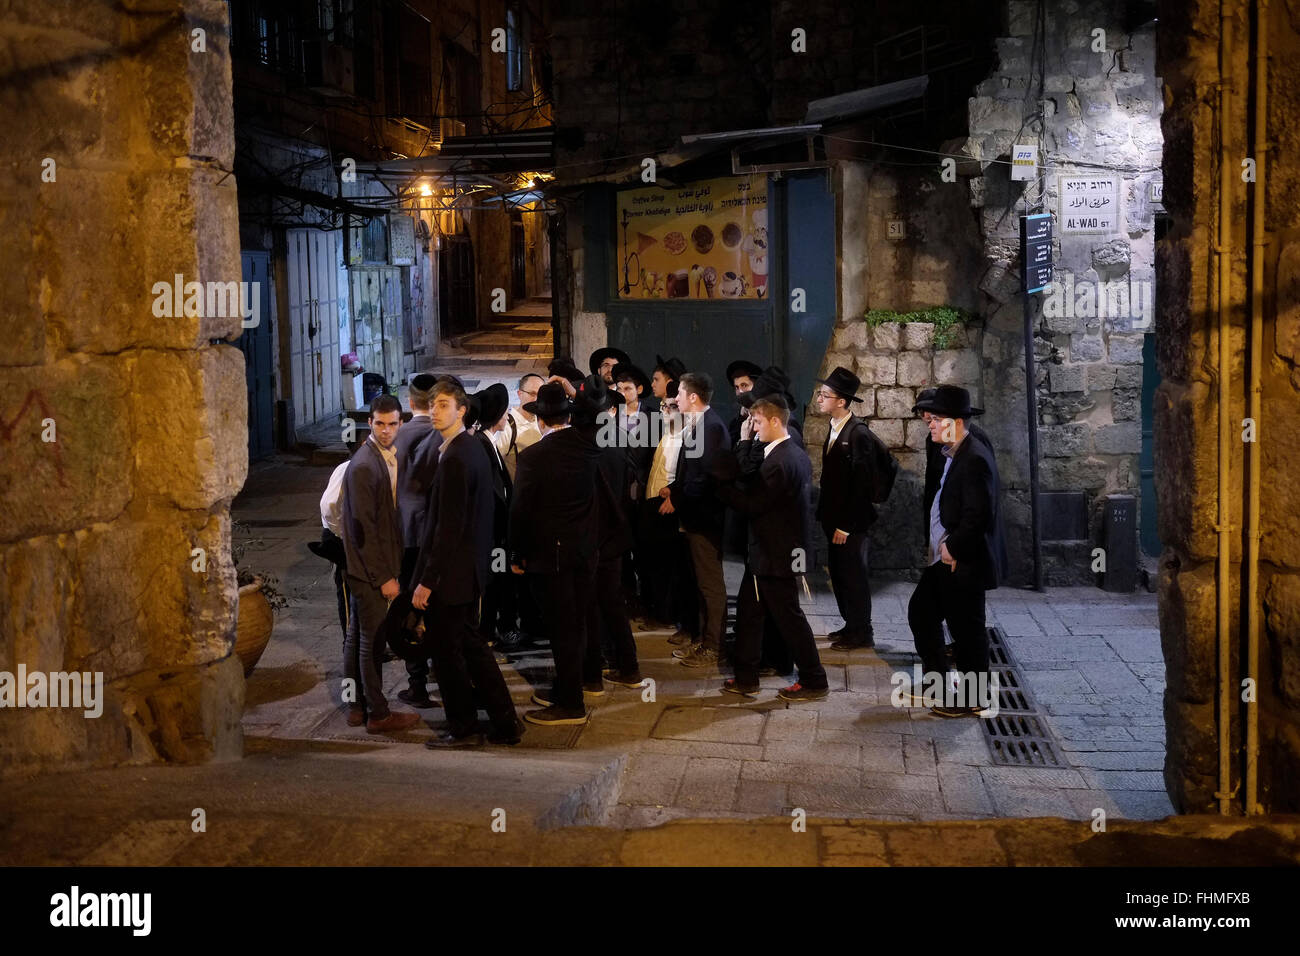 Jerusalem, Israel. 24th February, 2016. A group of Israeli religious Jews at the Muslim Quarter in the old city. East Jerusalem, Israel on 16 October 2015  The Housing Ministry has been funding security for settlers in East Jerusalem since the 1990s, through private security firms, who watch over ideological settlers who have implanted themselves in the heart of Palestinian neighborhoods in East Jerusalem. The number of Jews living in these areas is estimated at less than 3,000. Stock Photo